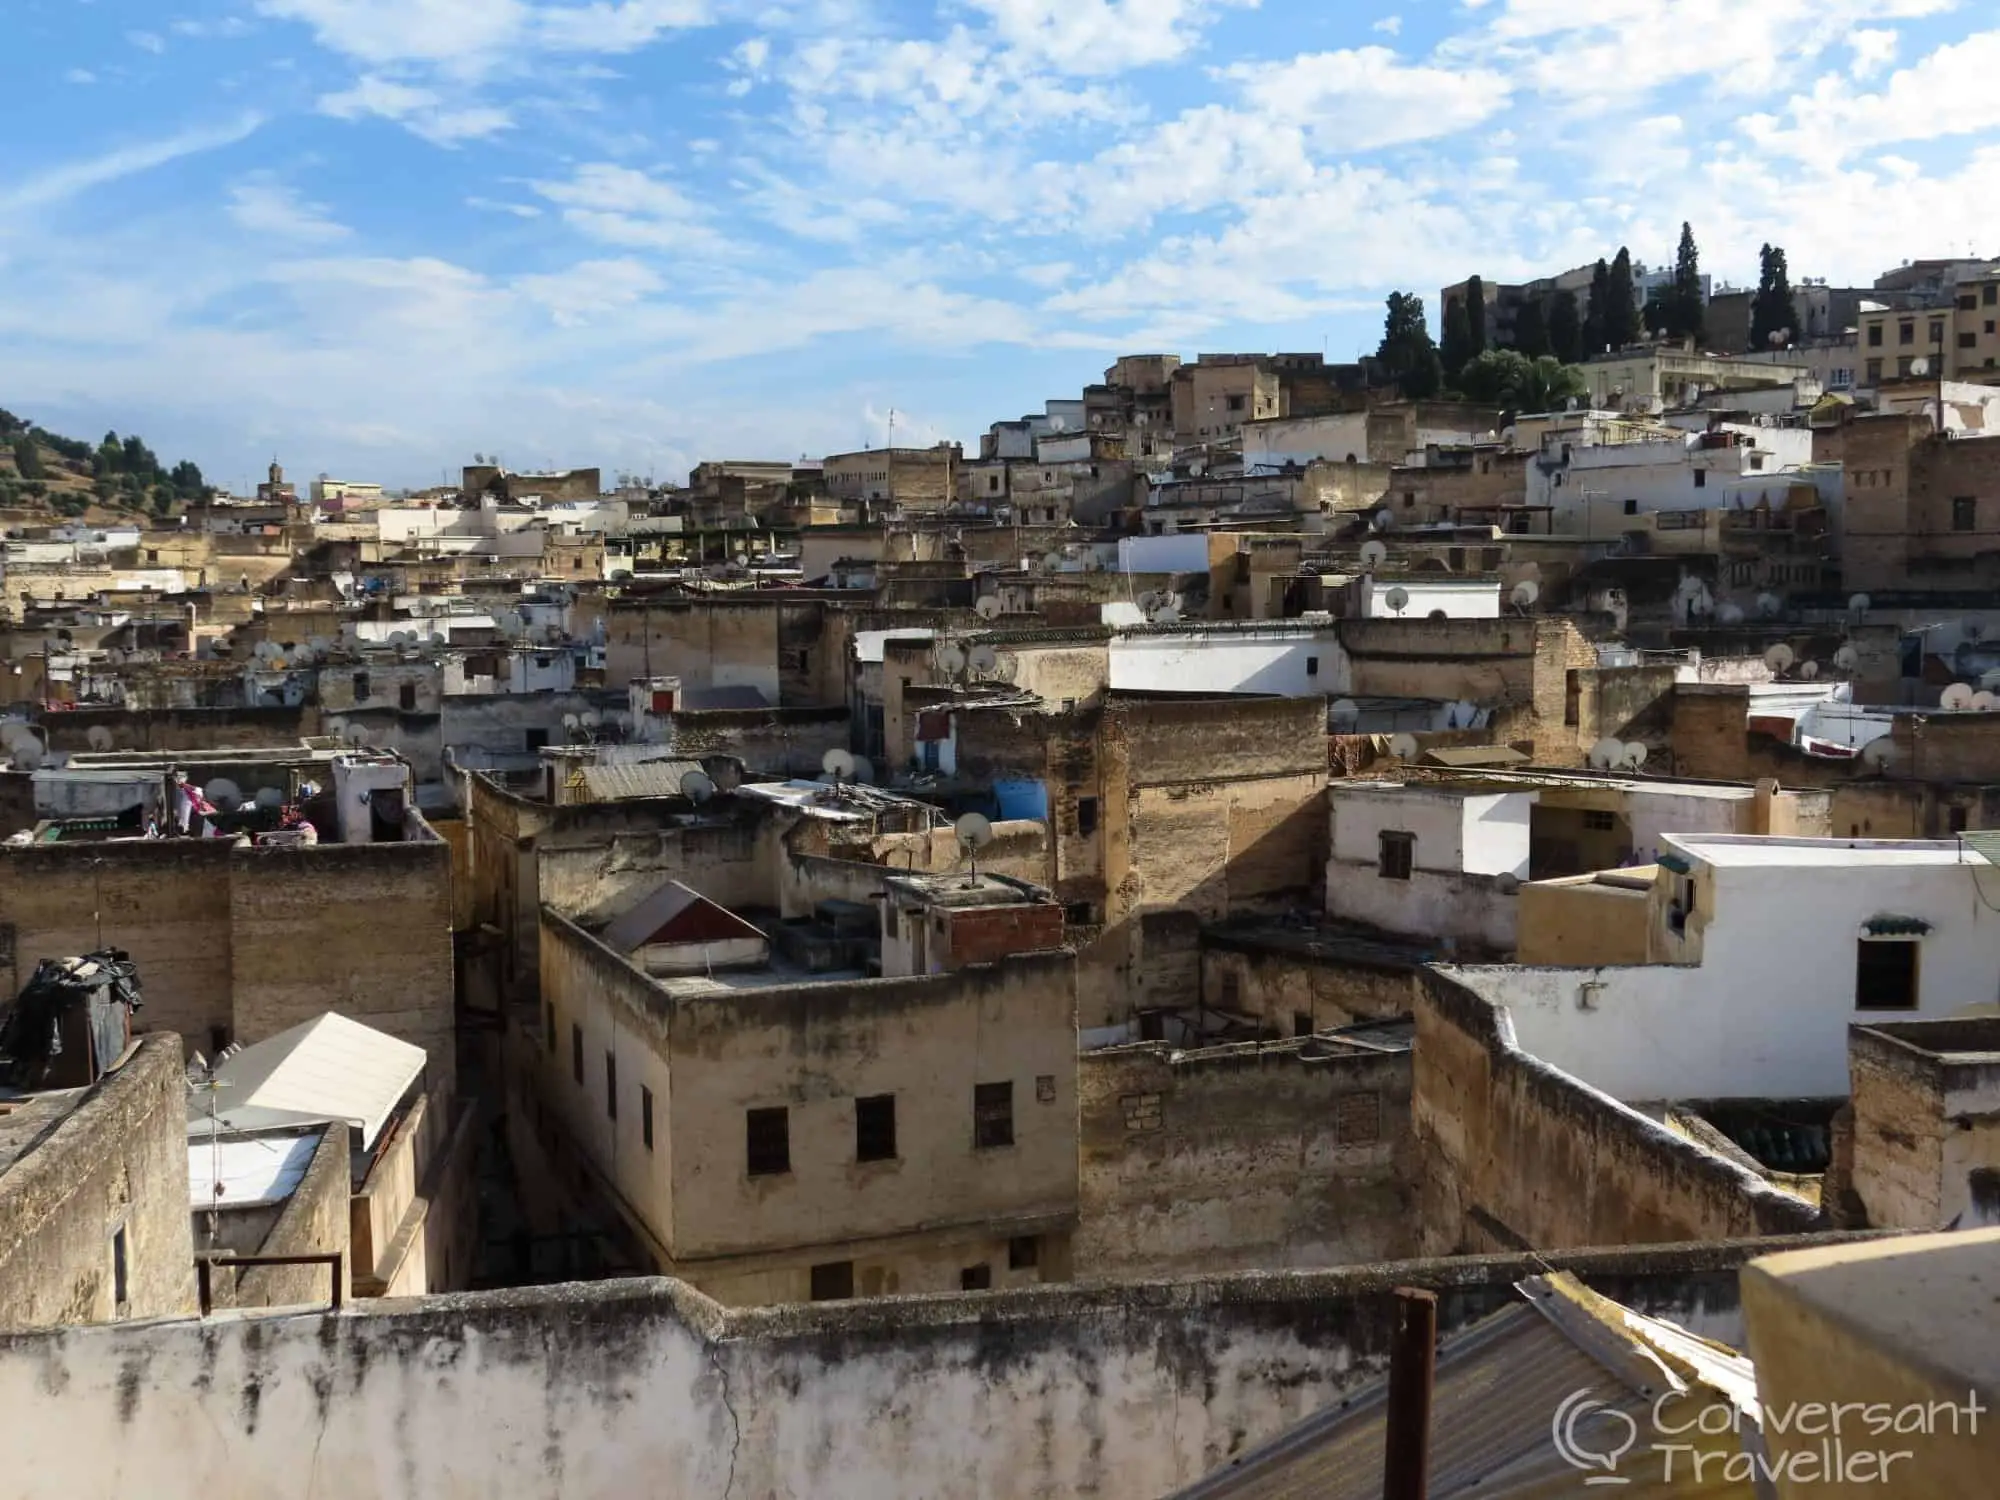 View from the roof at Riad Laayoun, Fes, Morocco